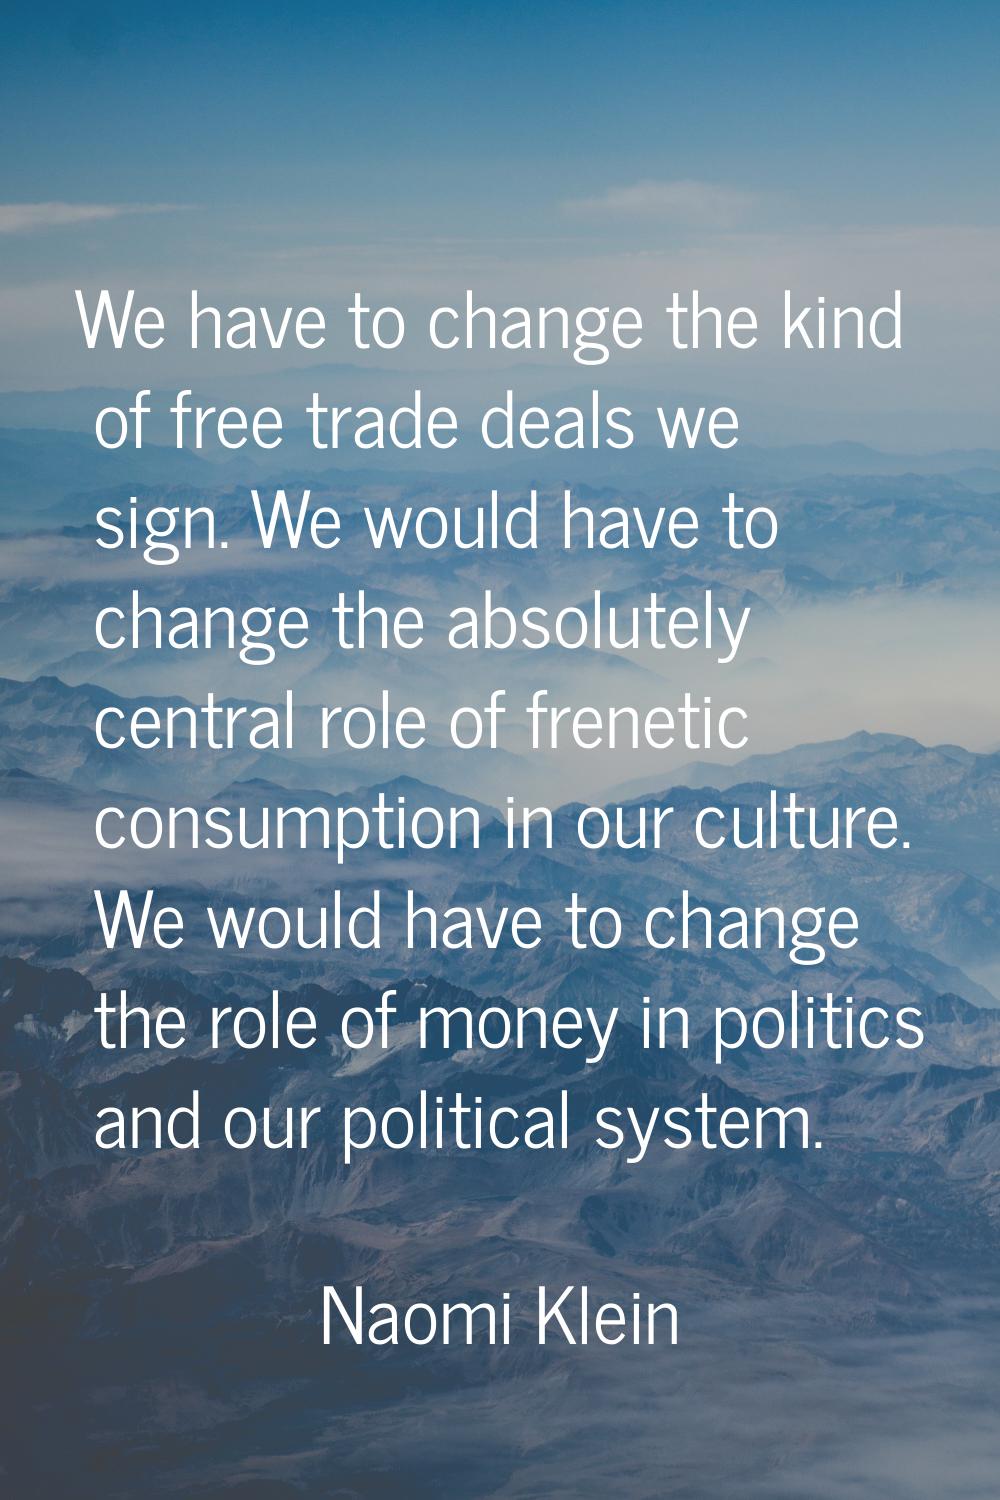 We have to change the kind of free trade deals we sign. We would have to change the absolutely cent